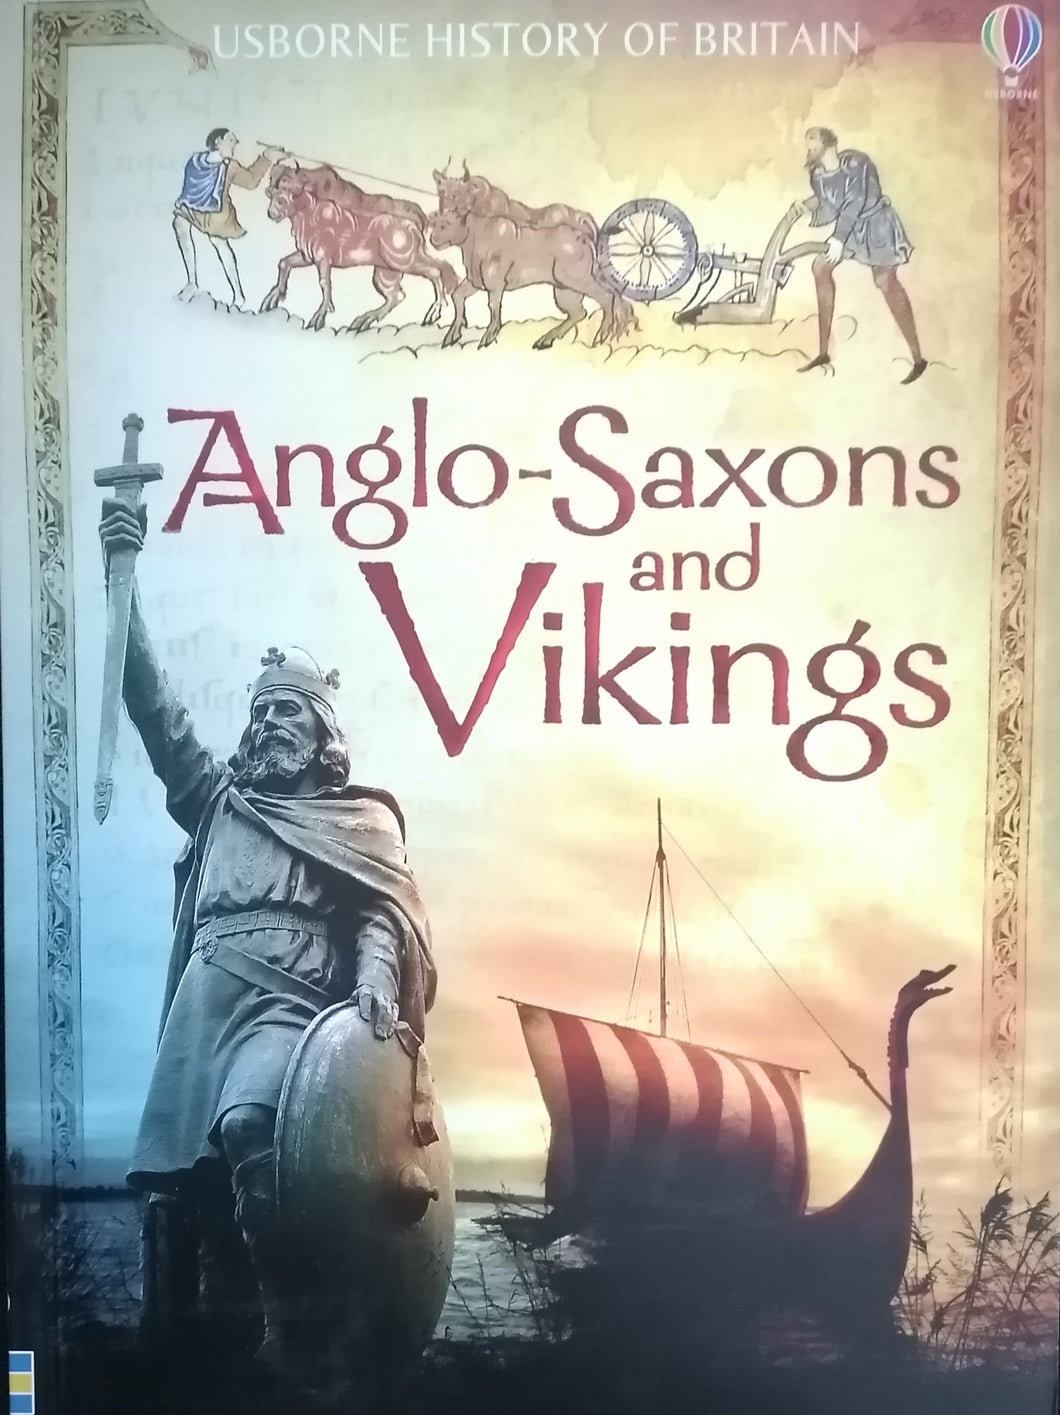 Usborne History Of Britain Anglo-Saxons and Vikings